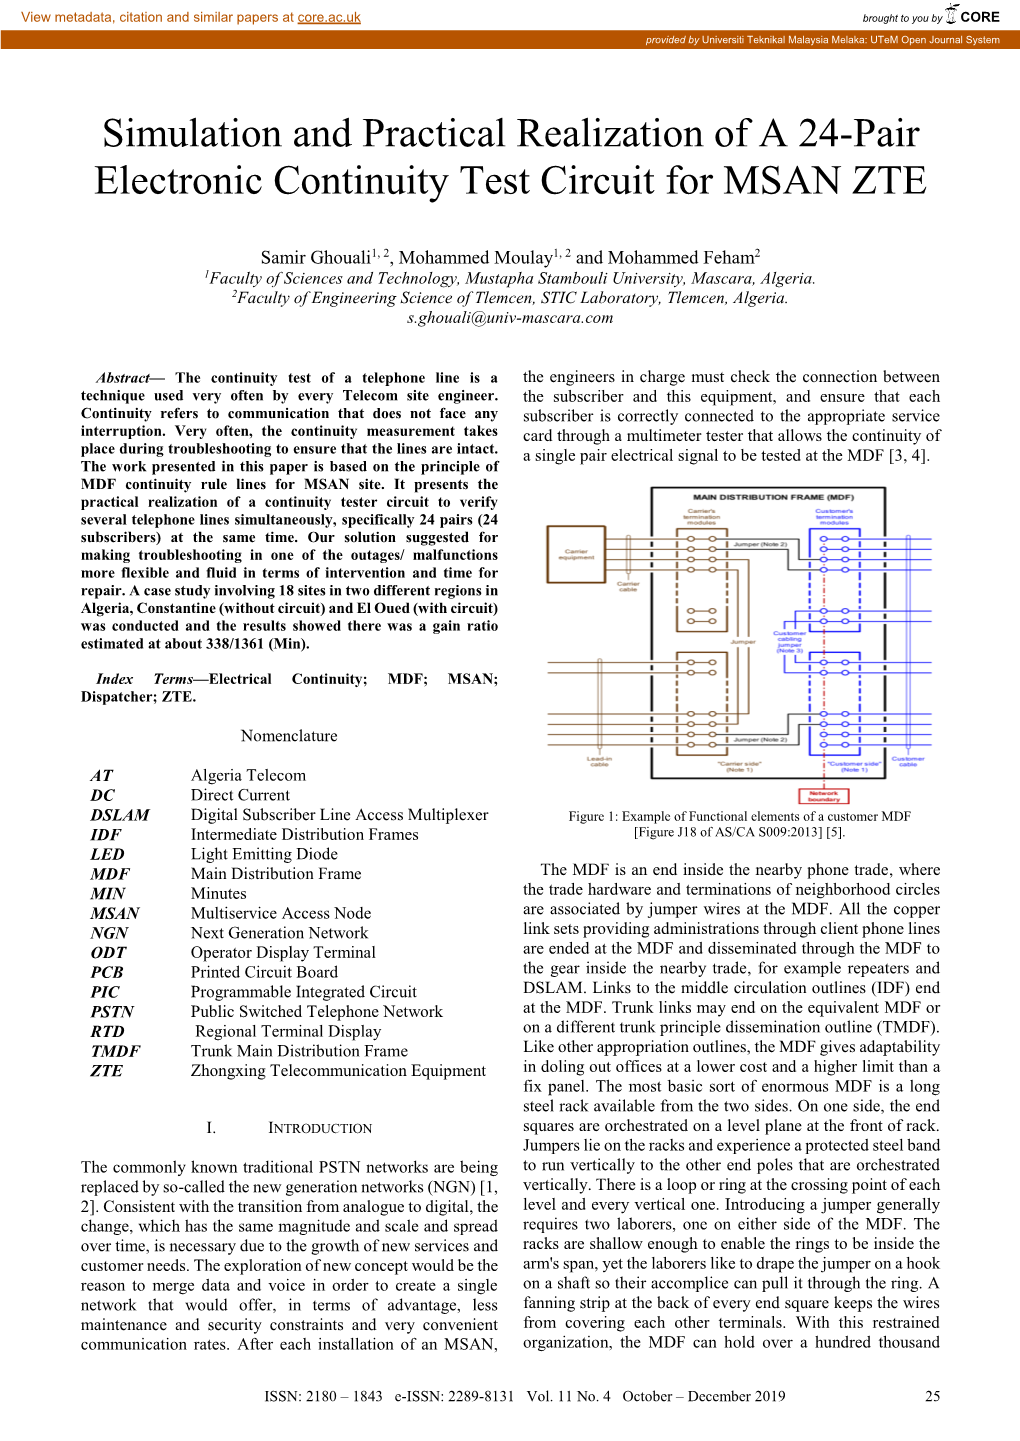 Simulation and Practical Realization of a 24-Pair Electronic Continuity Test Circuit for MSAN ZTE